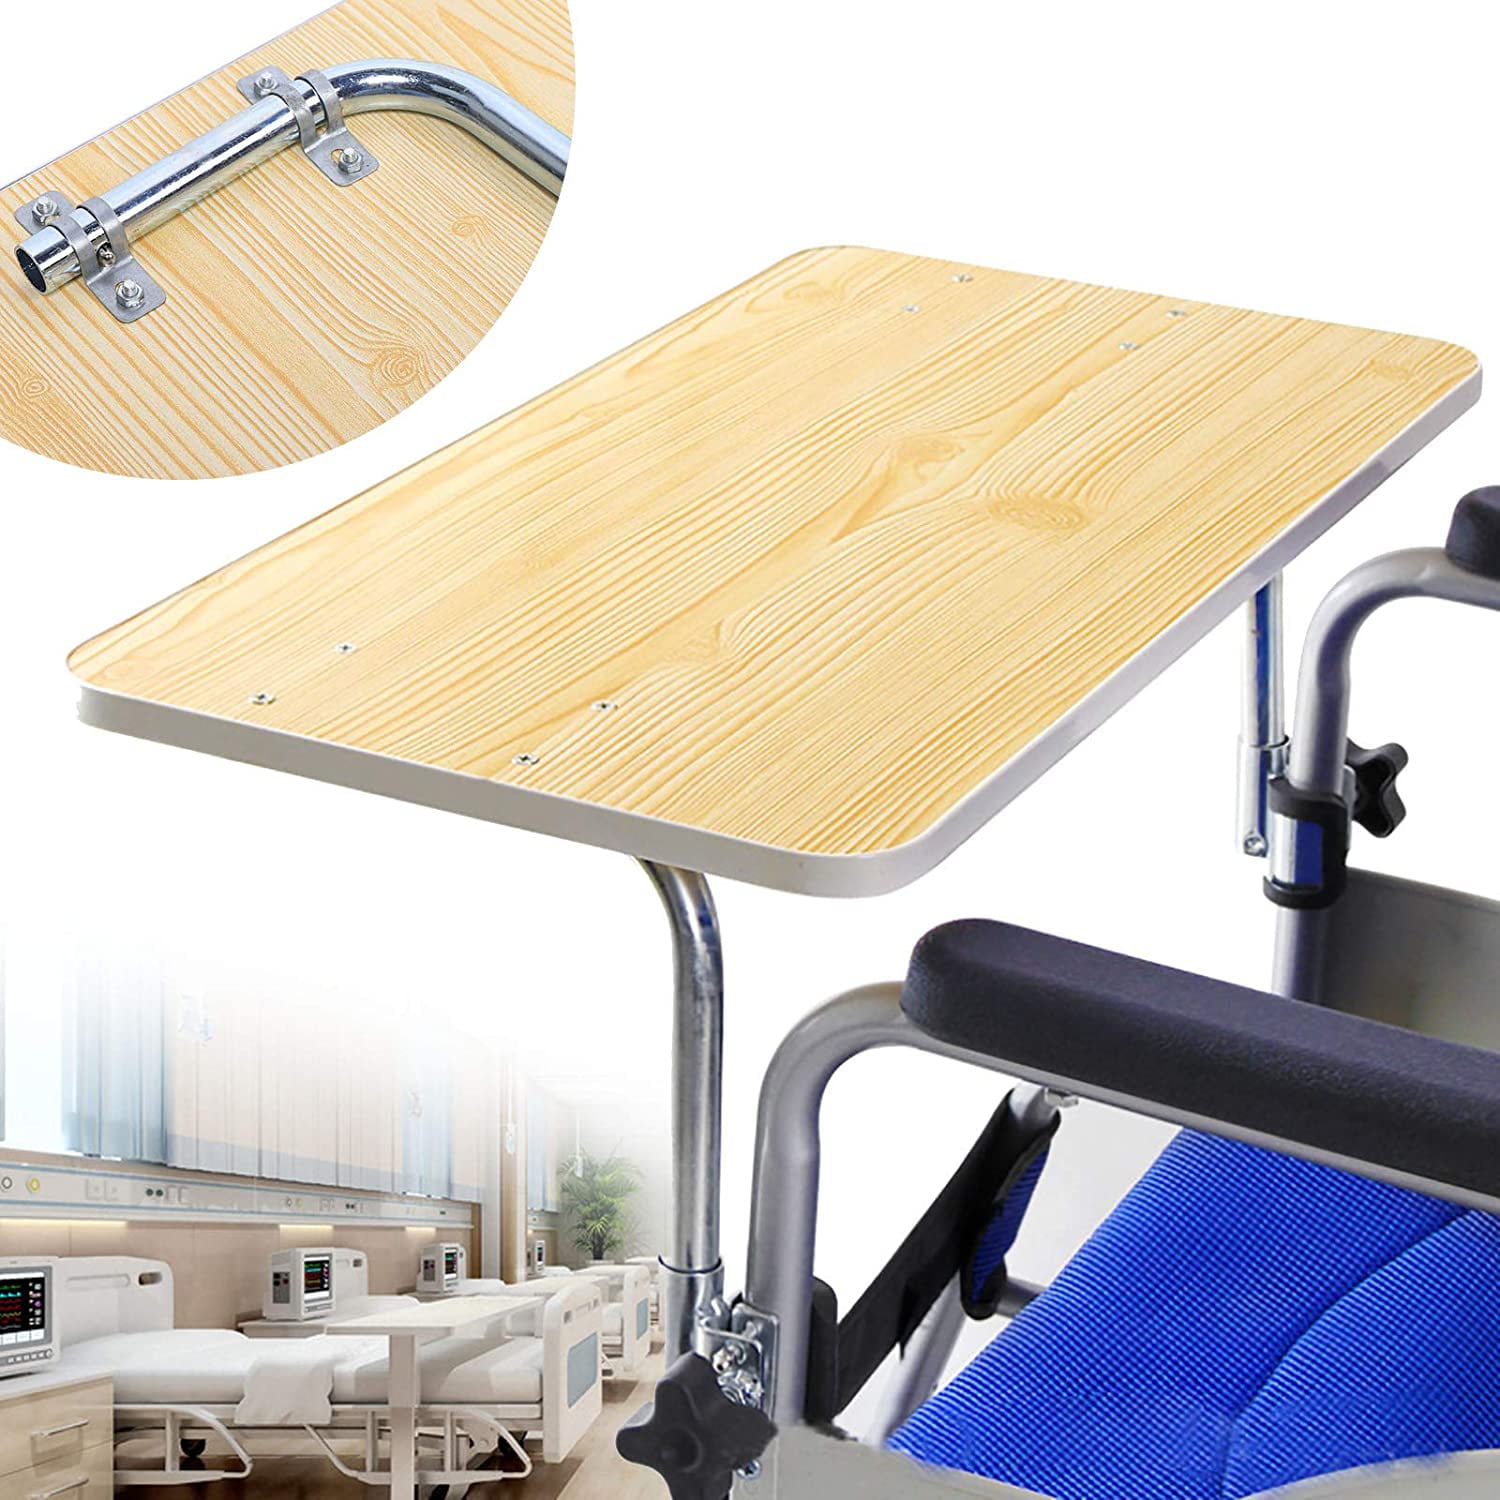 Miumaeov Detachable Wooden Wheelchair Lap Tray Table for Eating Reading 